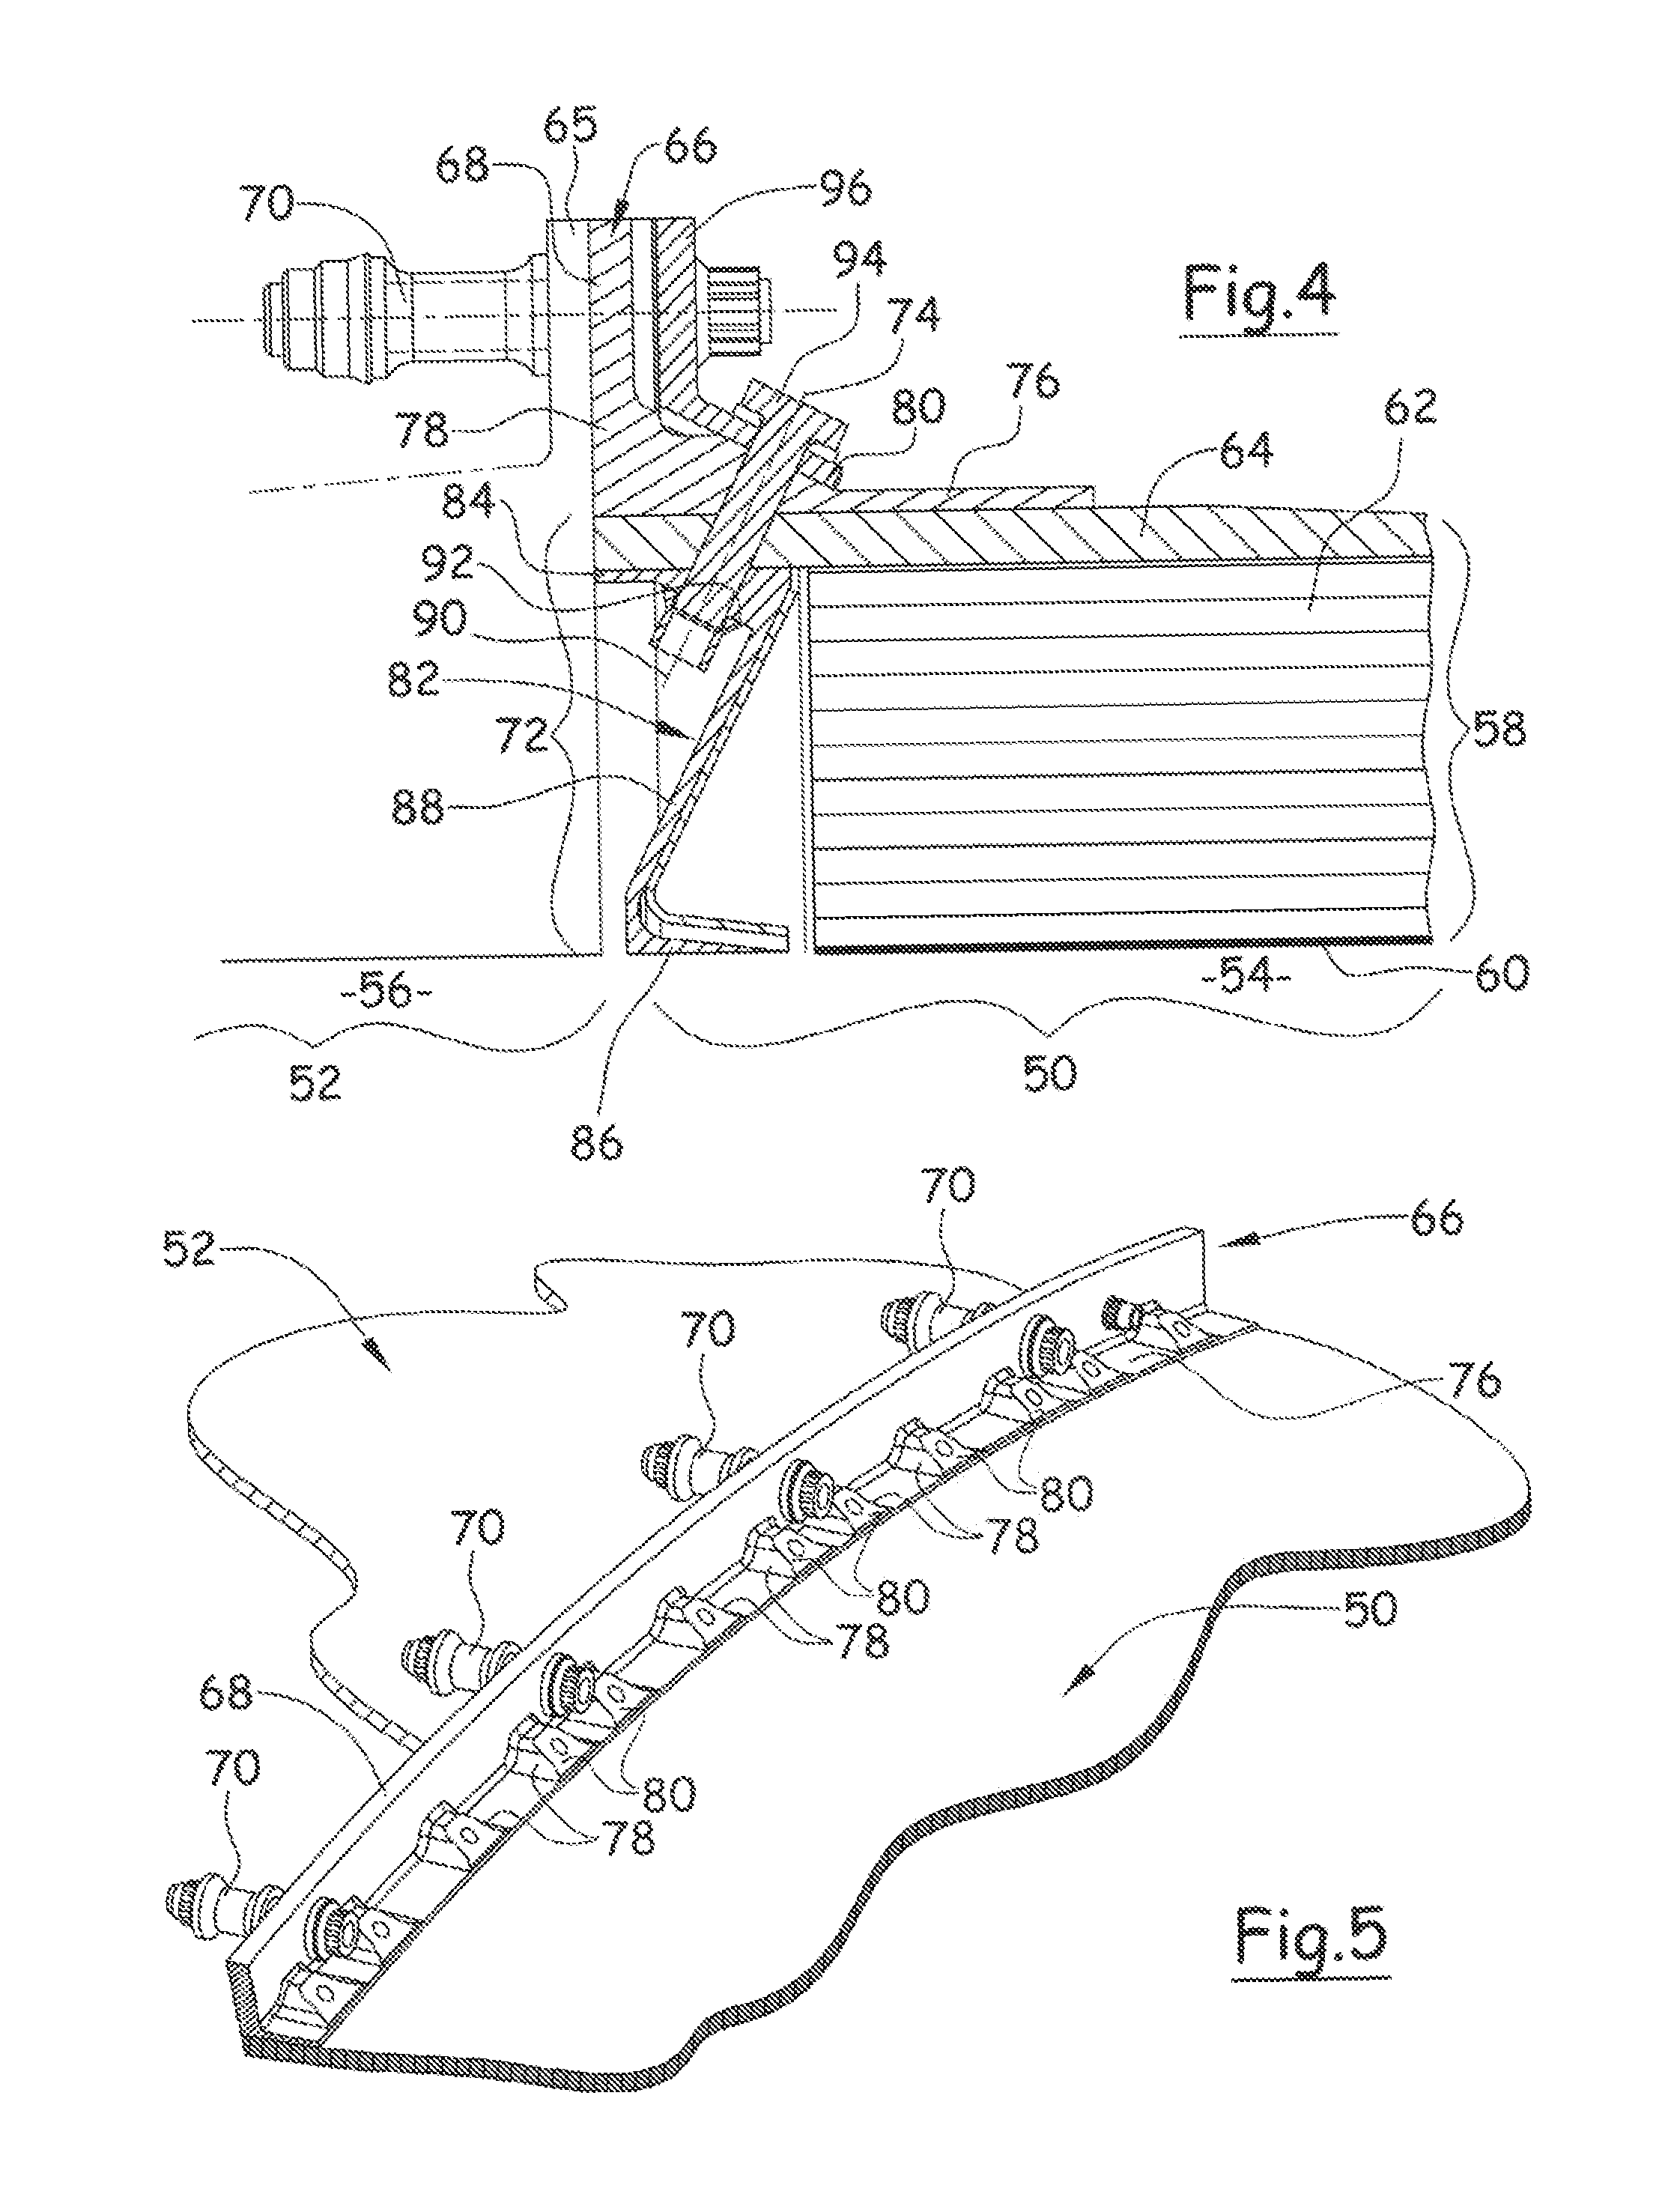 Device for connecting an air inlet with an aircraft nacelle actuator assembly